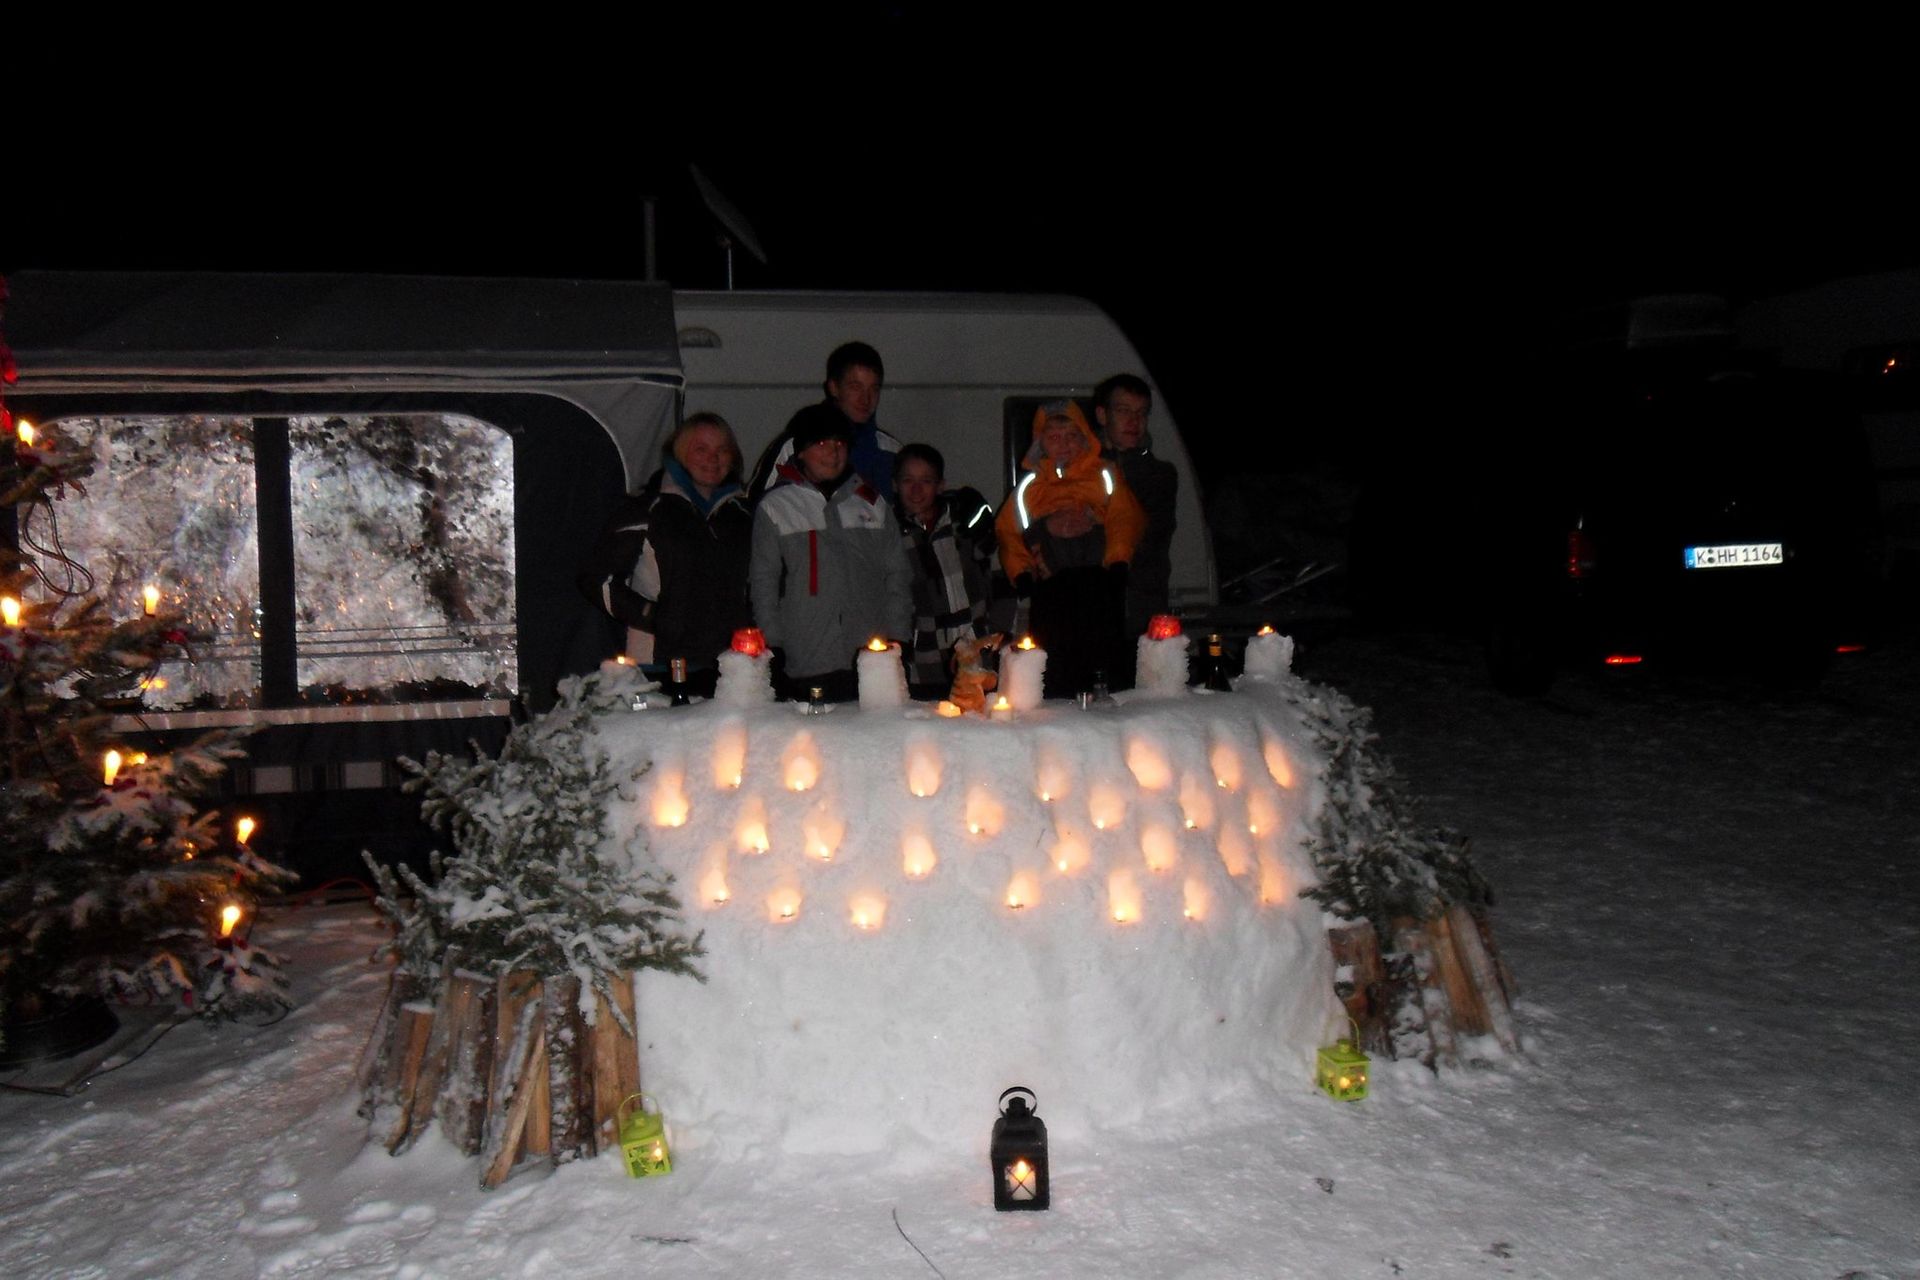 What is camping like in winter?